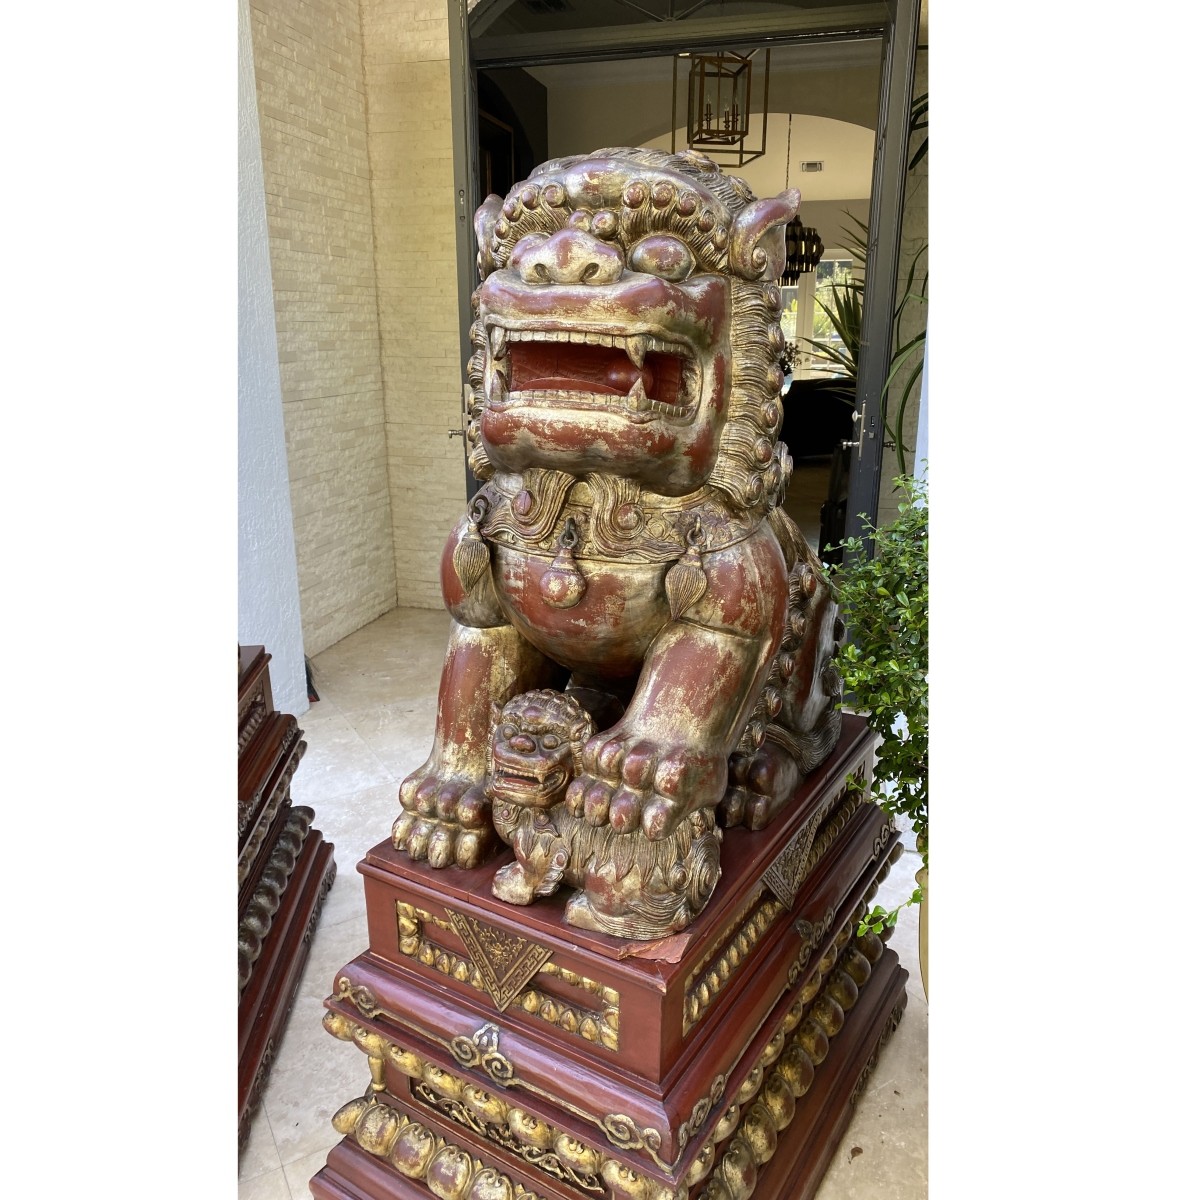 Pair of Chinese Foo Dogs